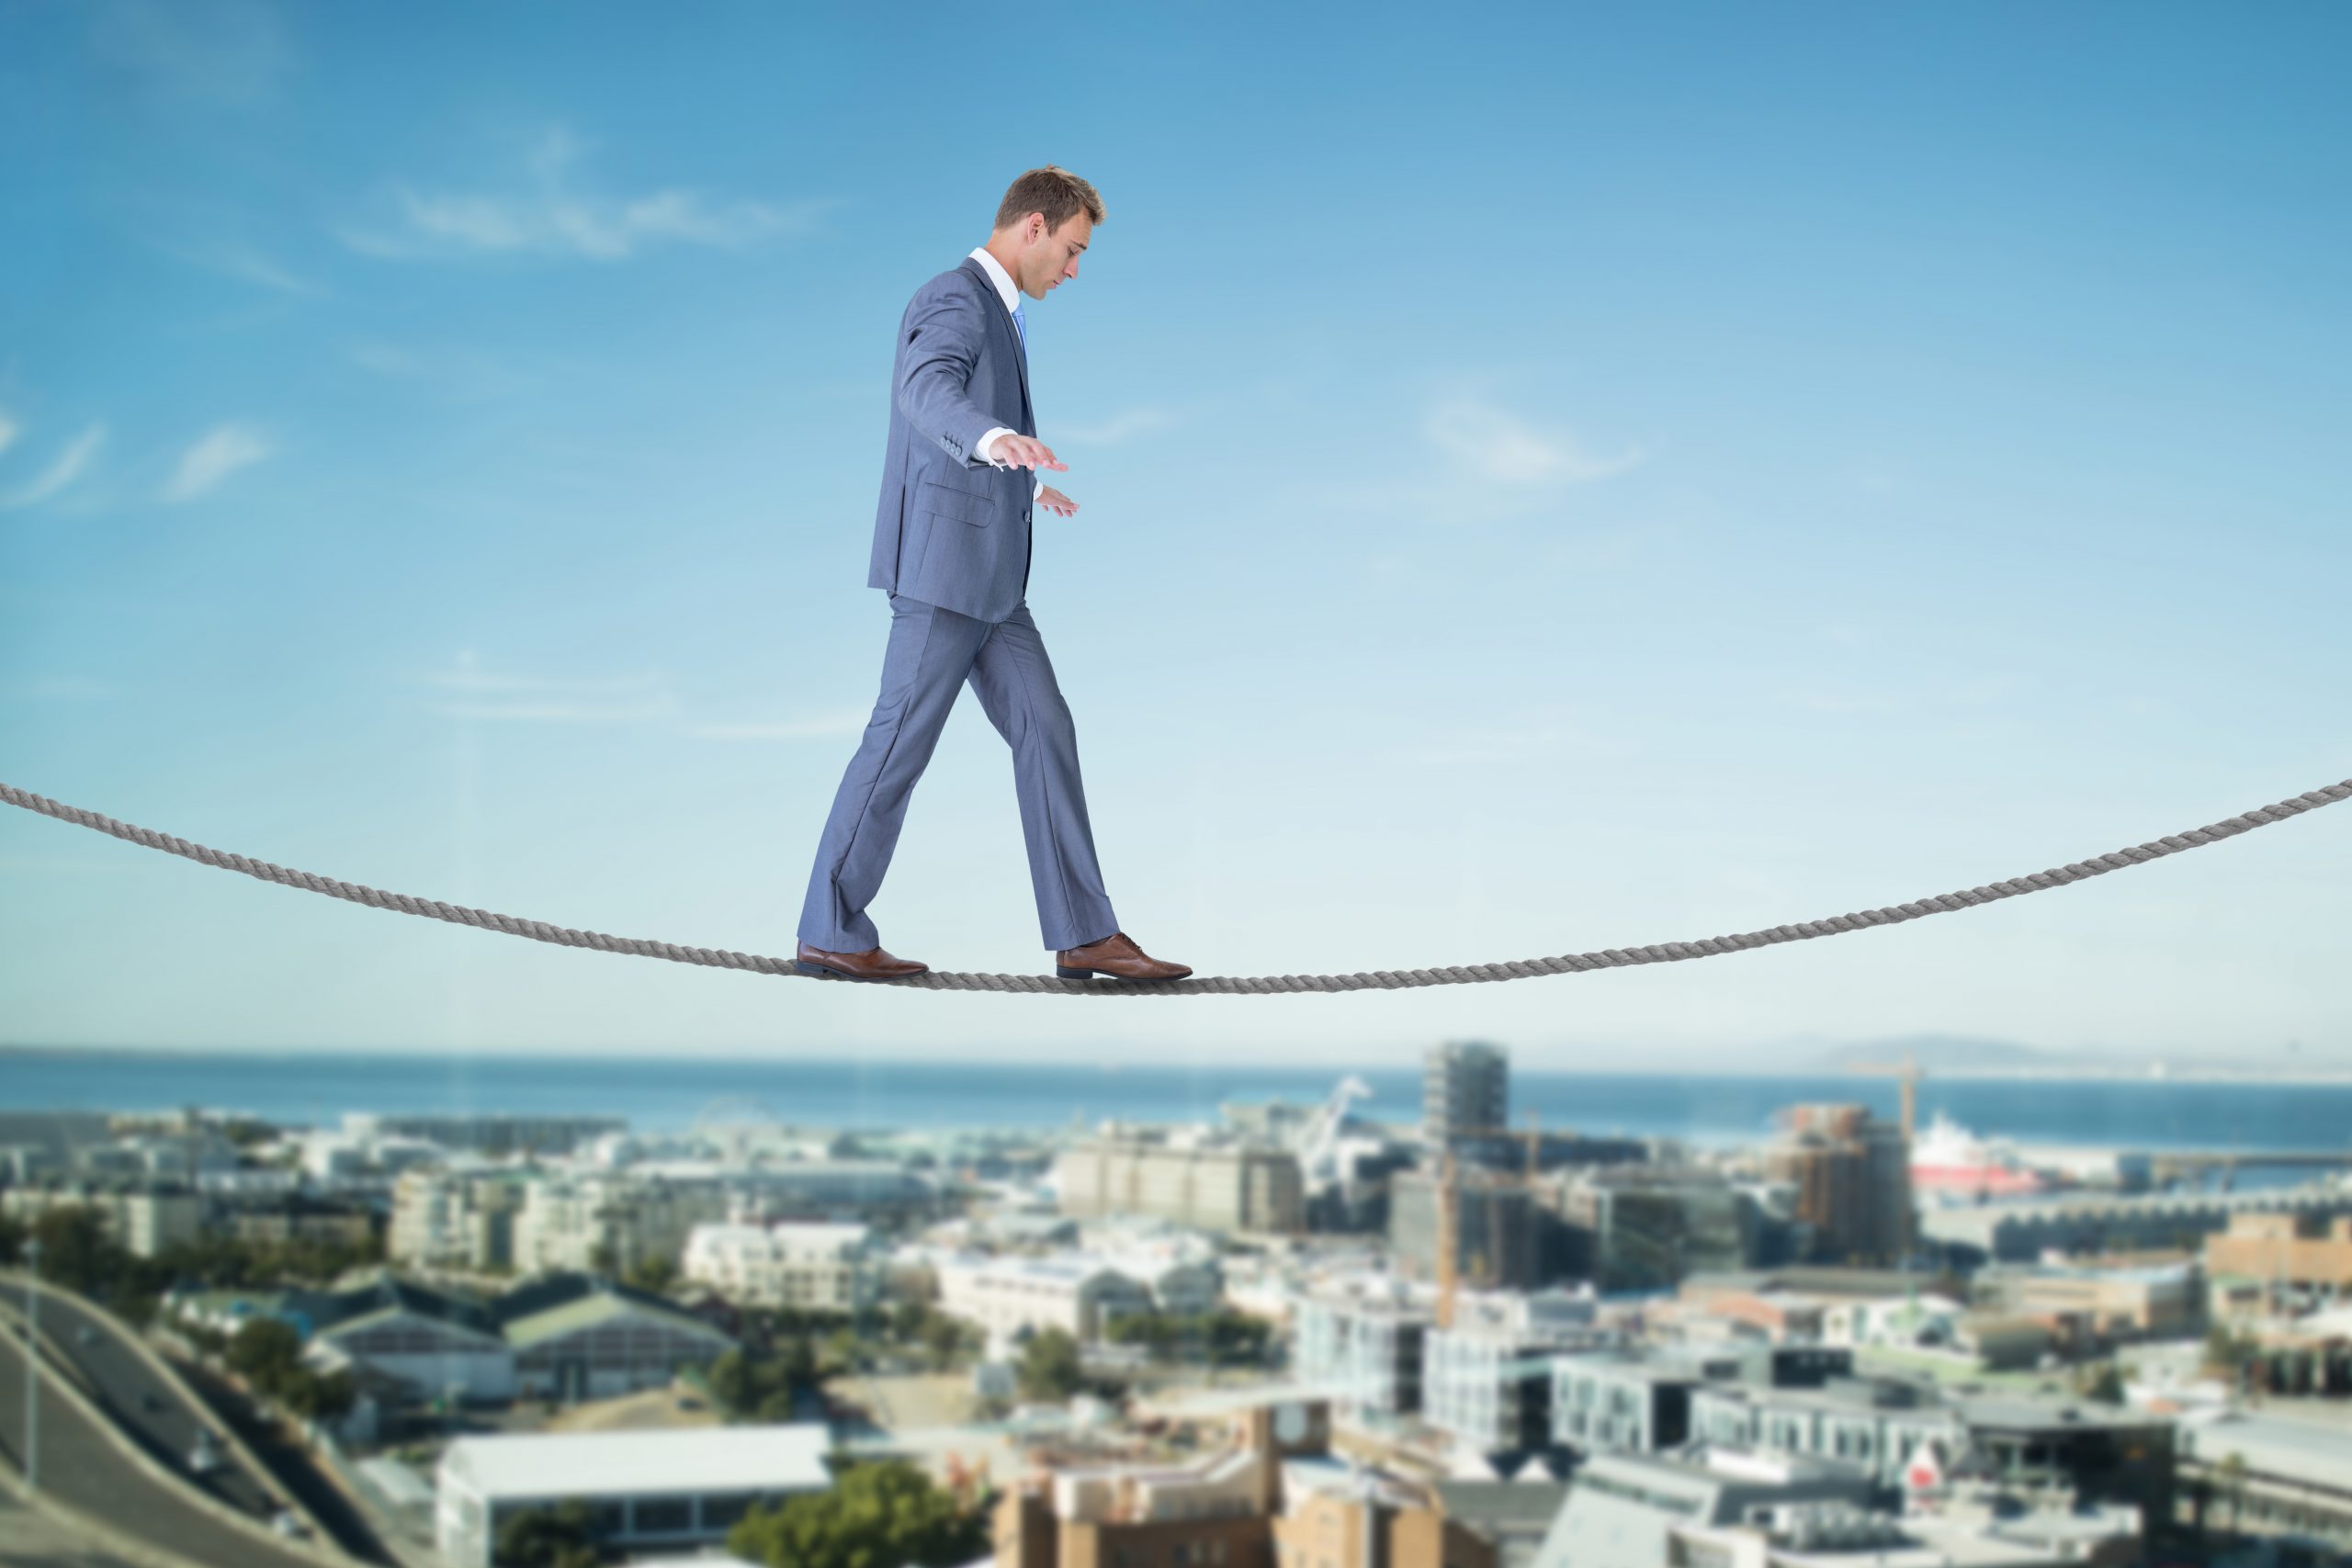 Businessman walking a tightrope over a city.